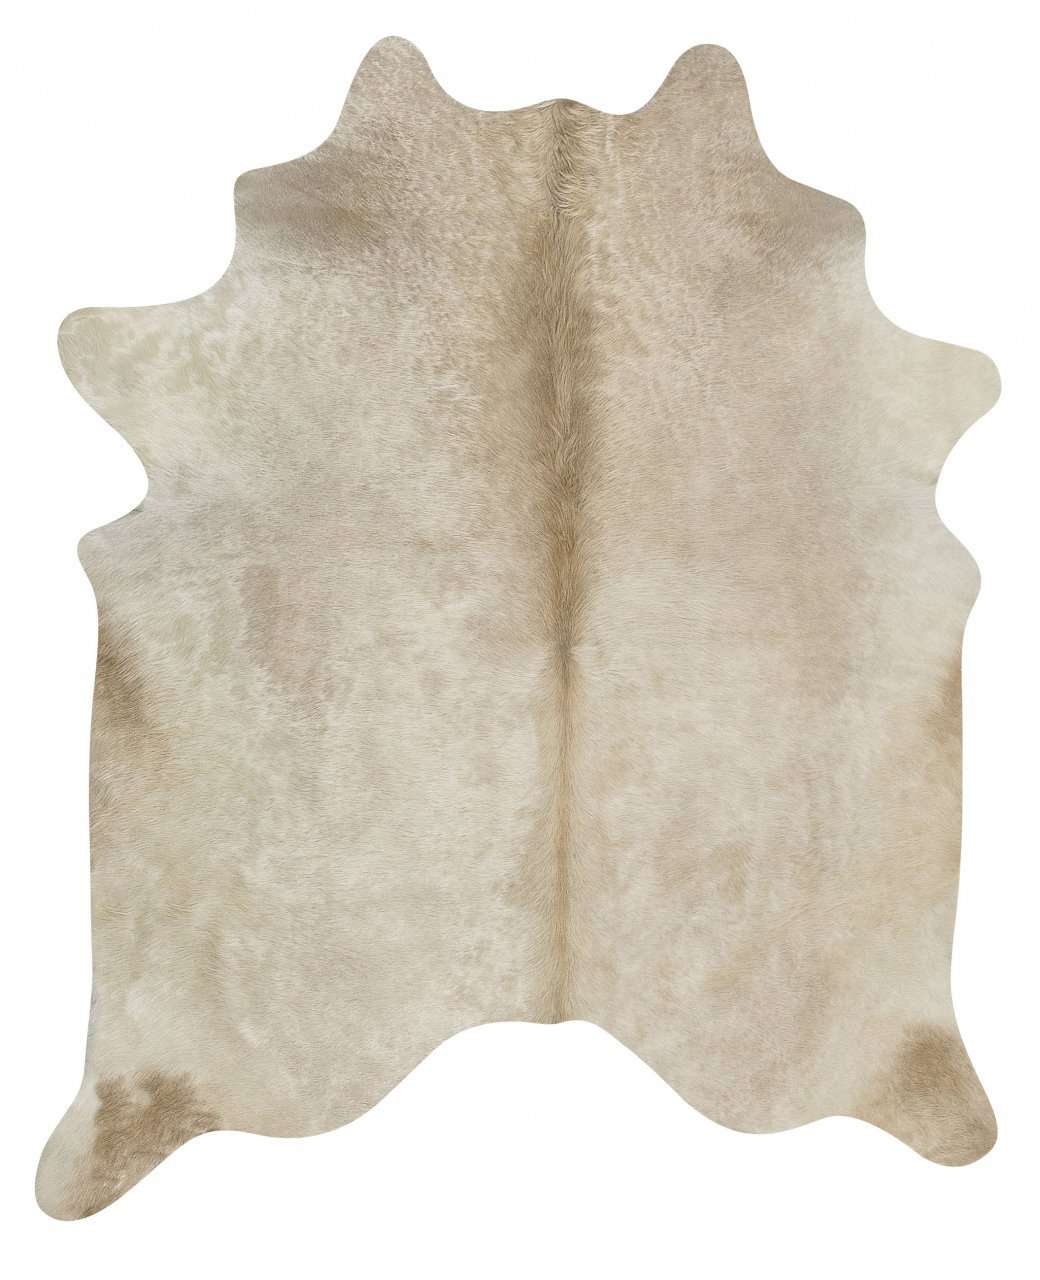 Rug Culture RUGS 170x120cm Cow Hide - Champagne